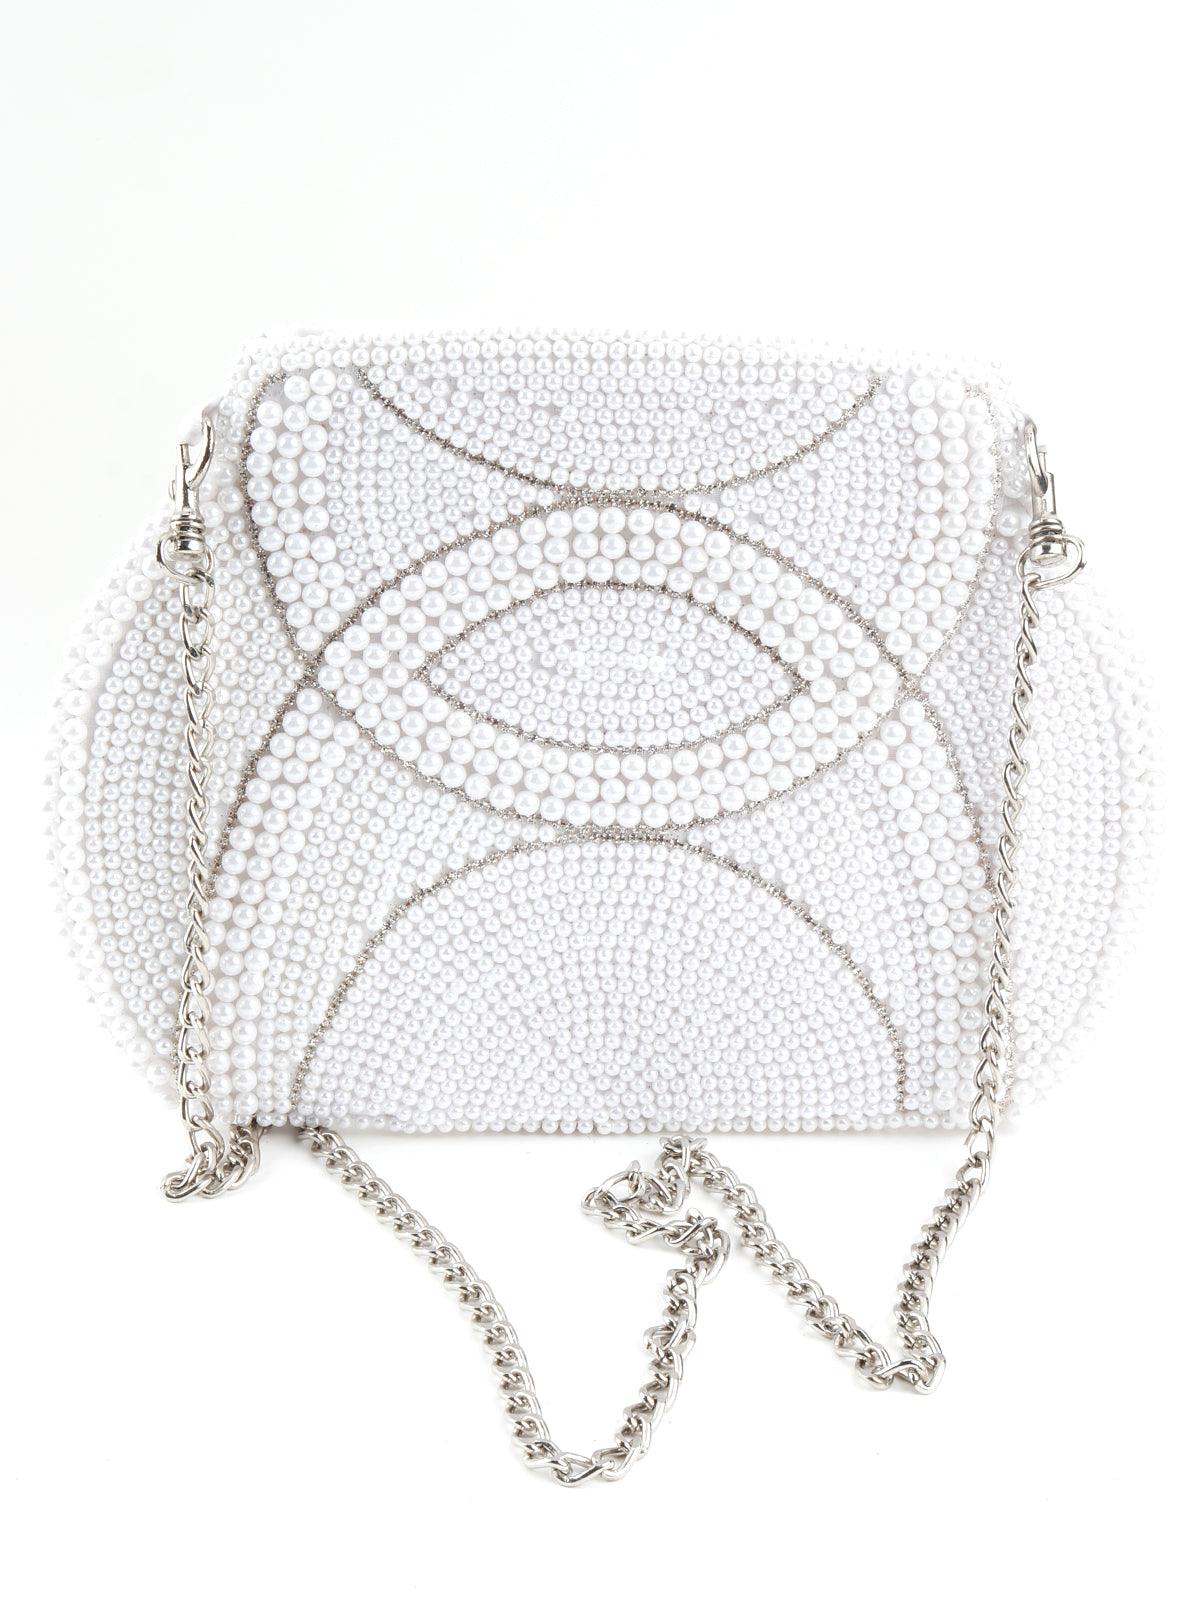 White Pearl Beads And Silver Stone Strands Sling Bag - Odette